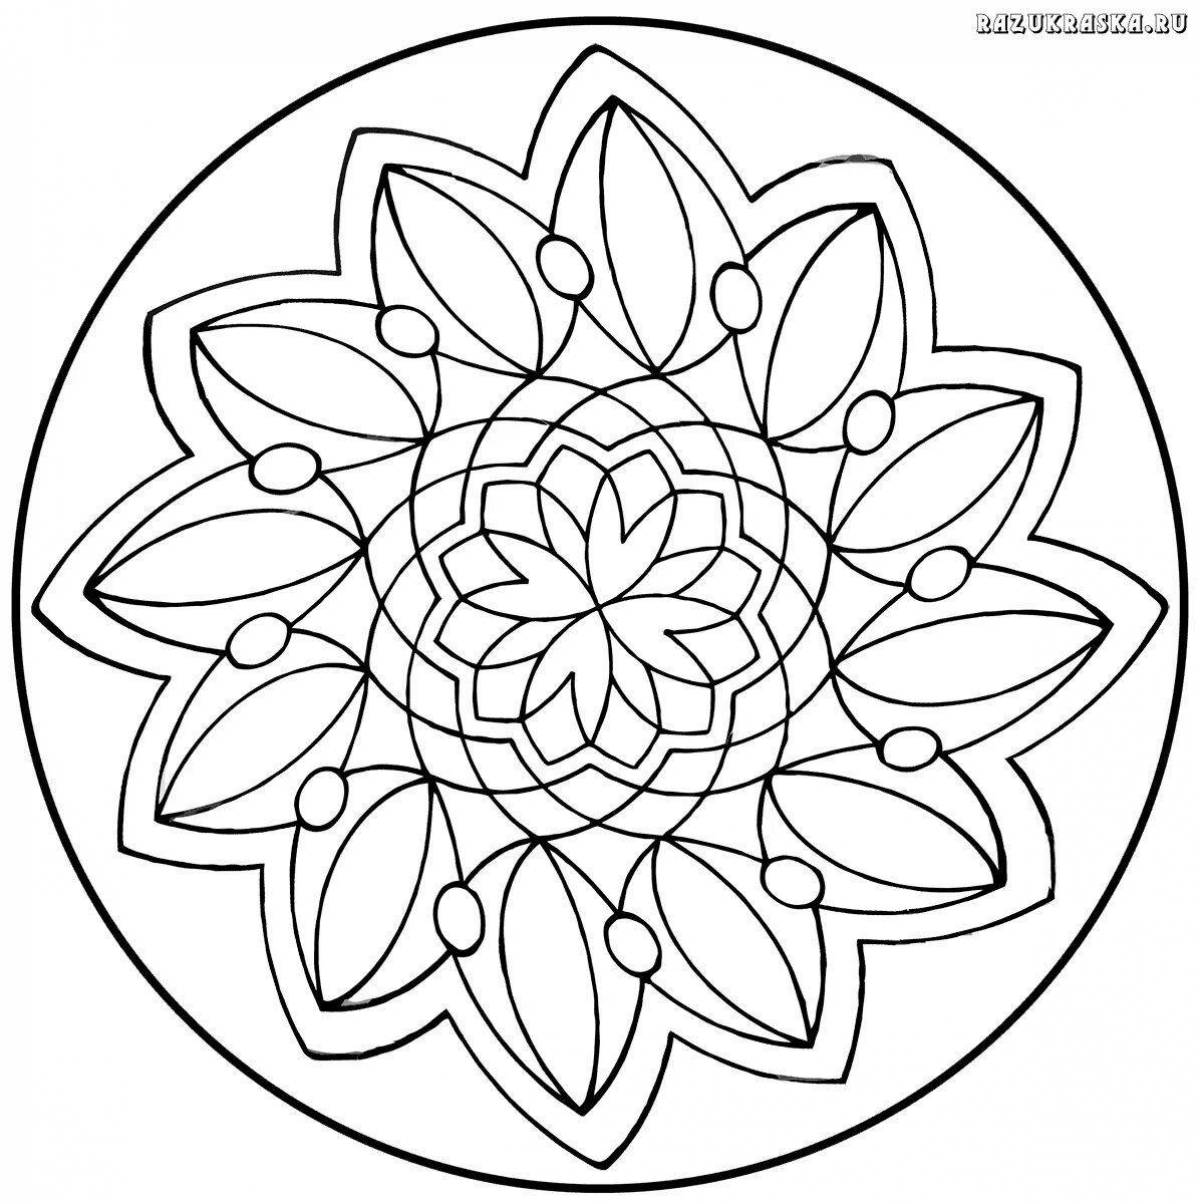 Coloring page of the inviting circle of life